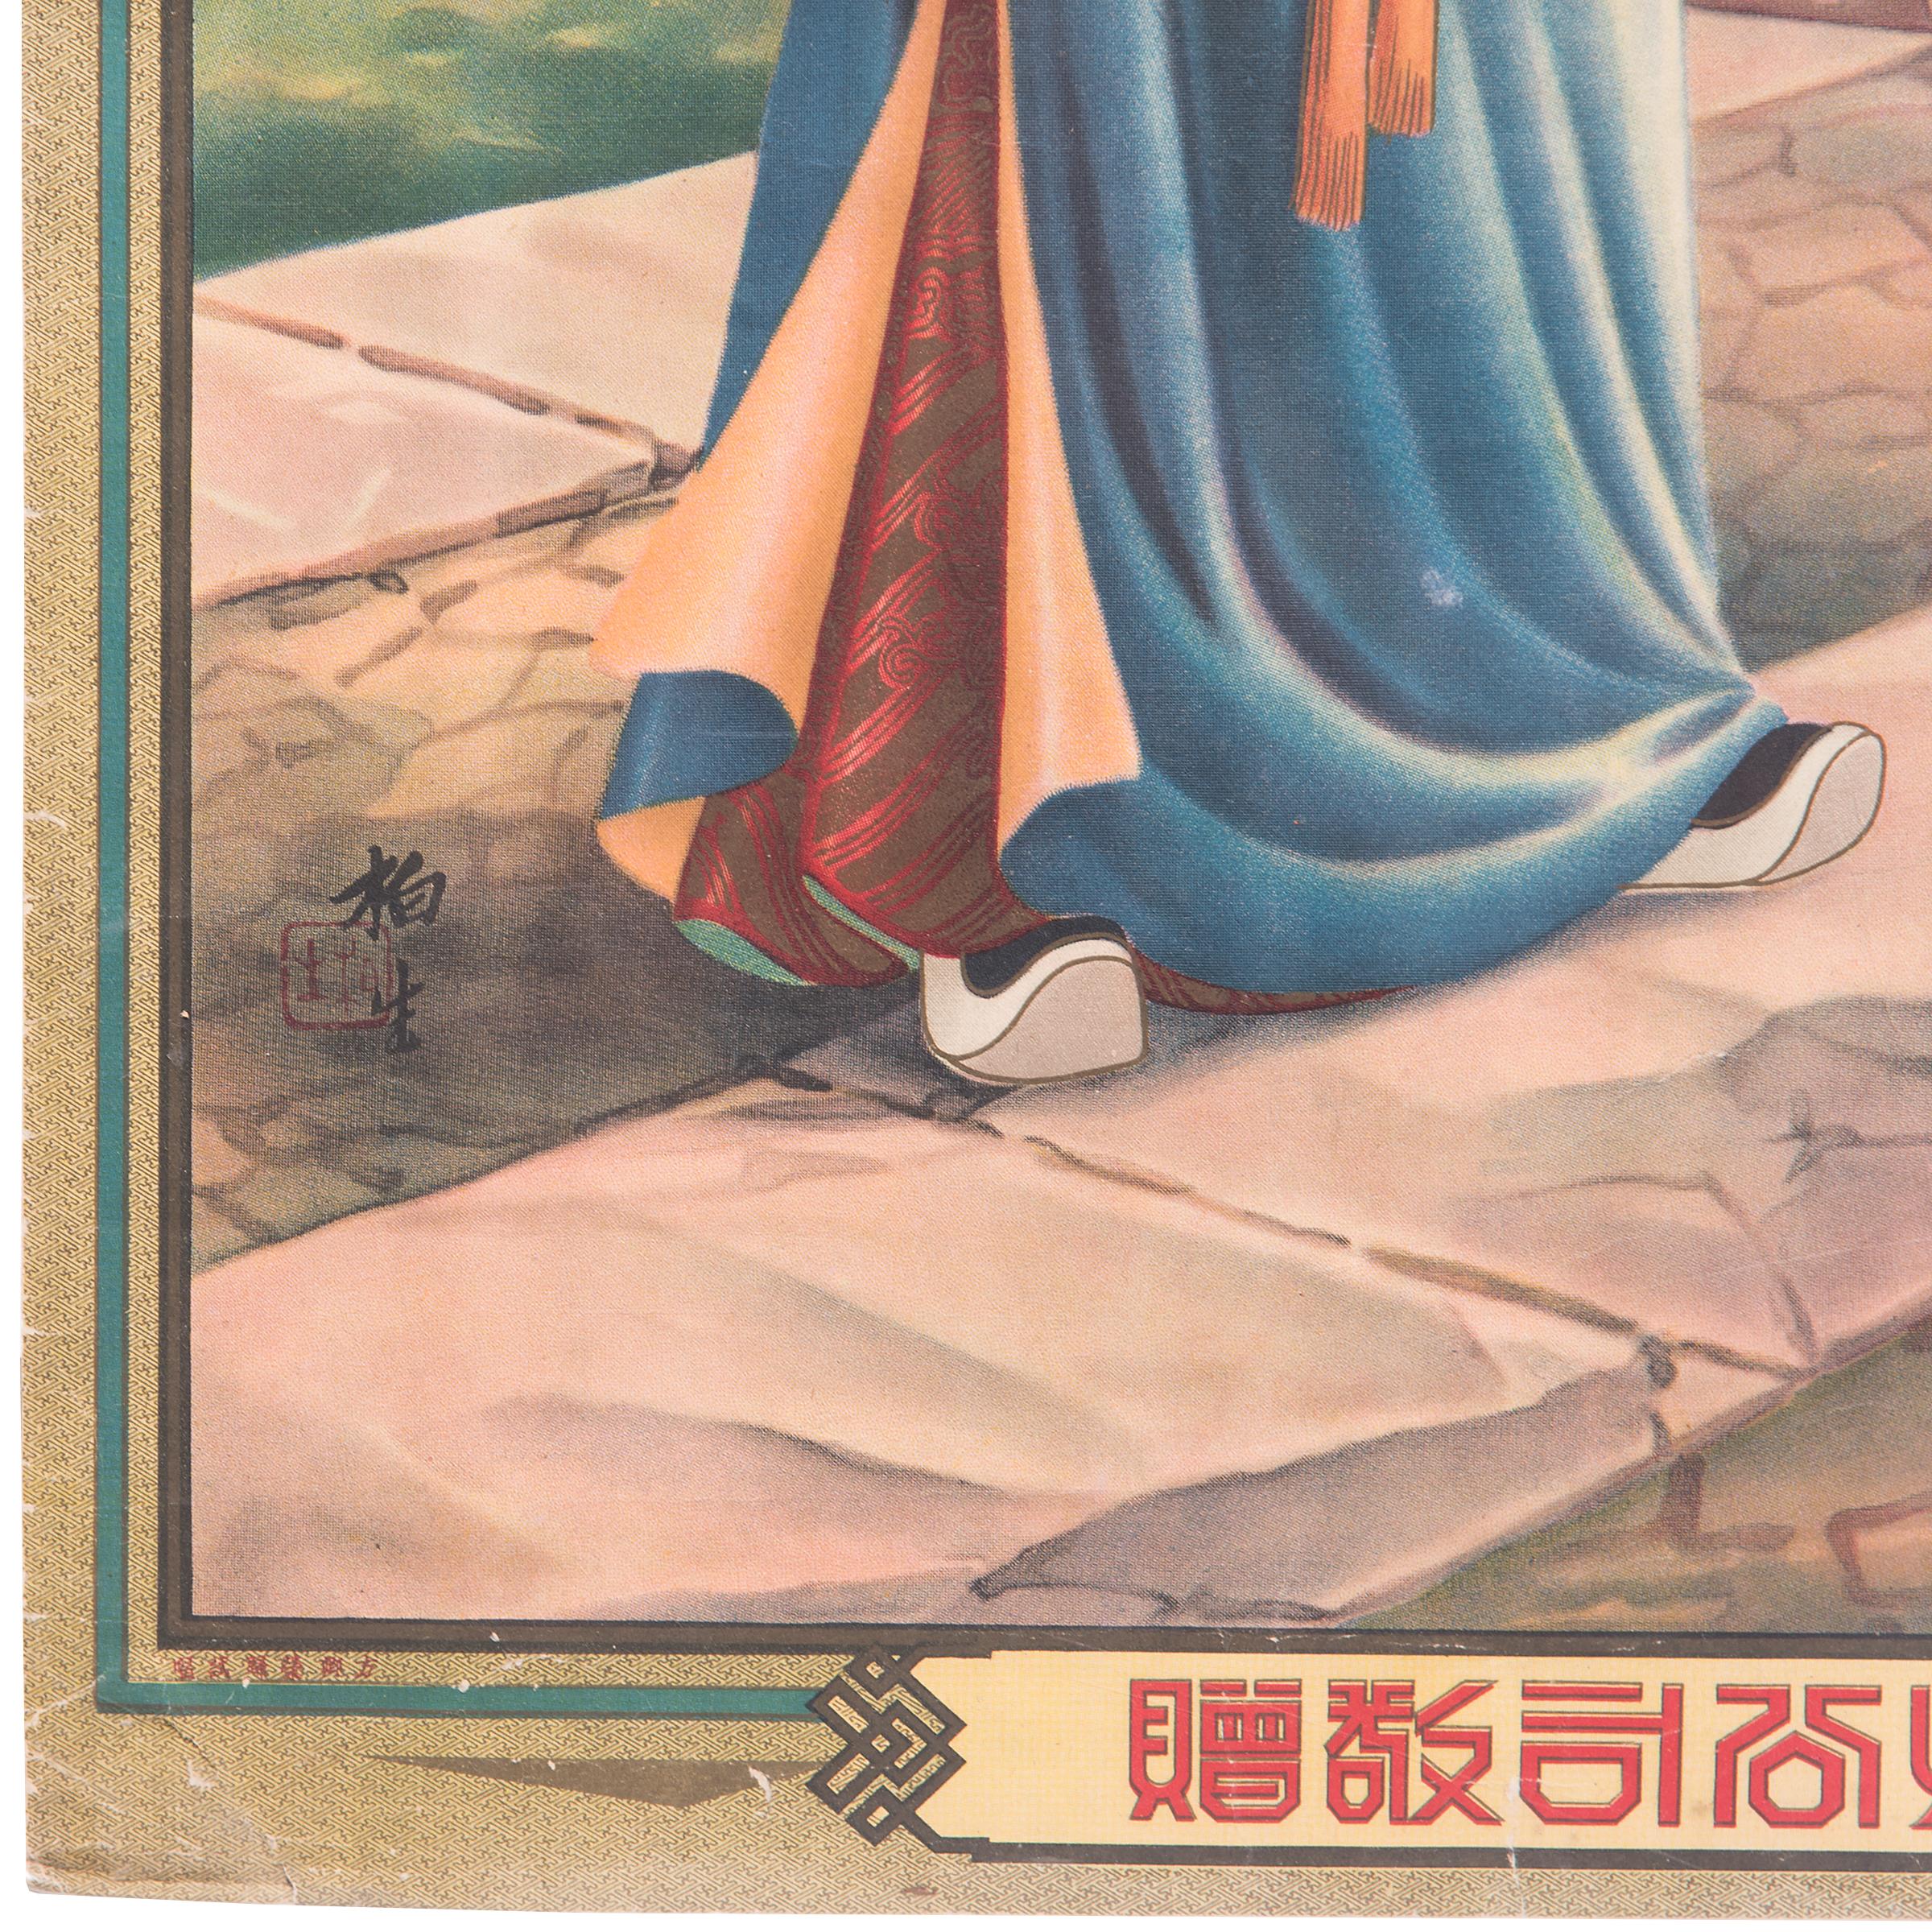 Vintage Chinese Cigarette Advertisement Poster, c. 1930 - Art Deco Art by Unknown